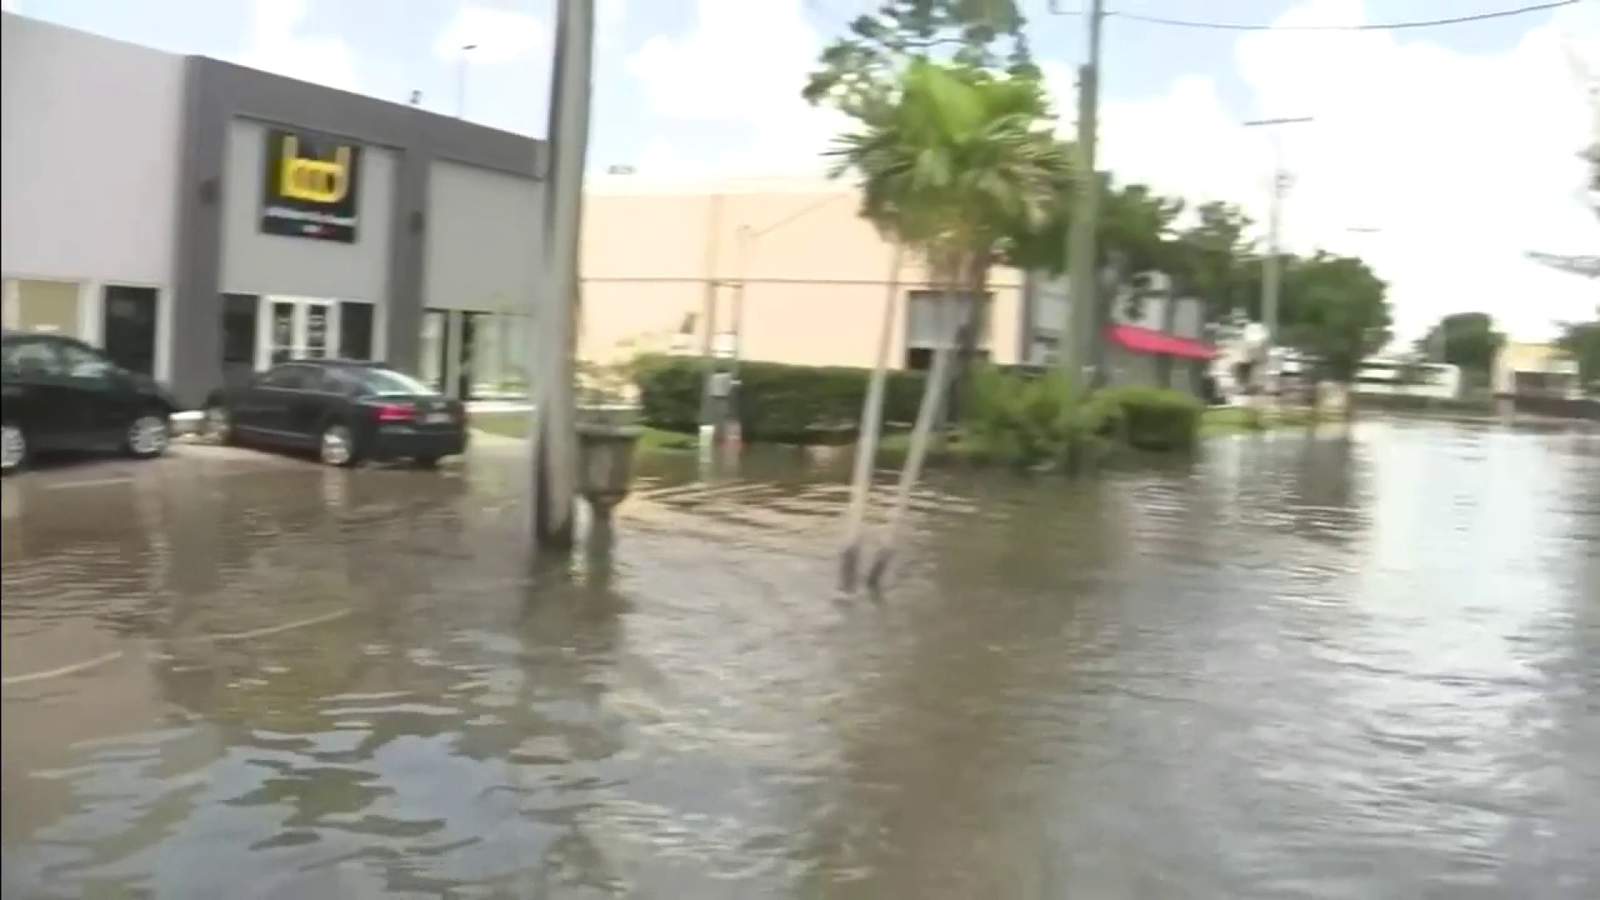 Sandbags will be distributed as South Florida prepares for heavy rain, flooding this weekend